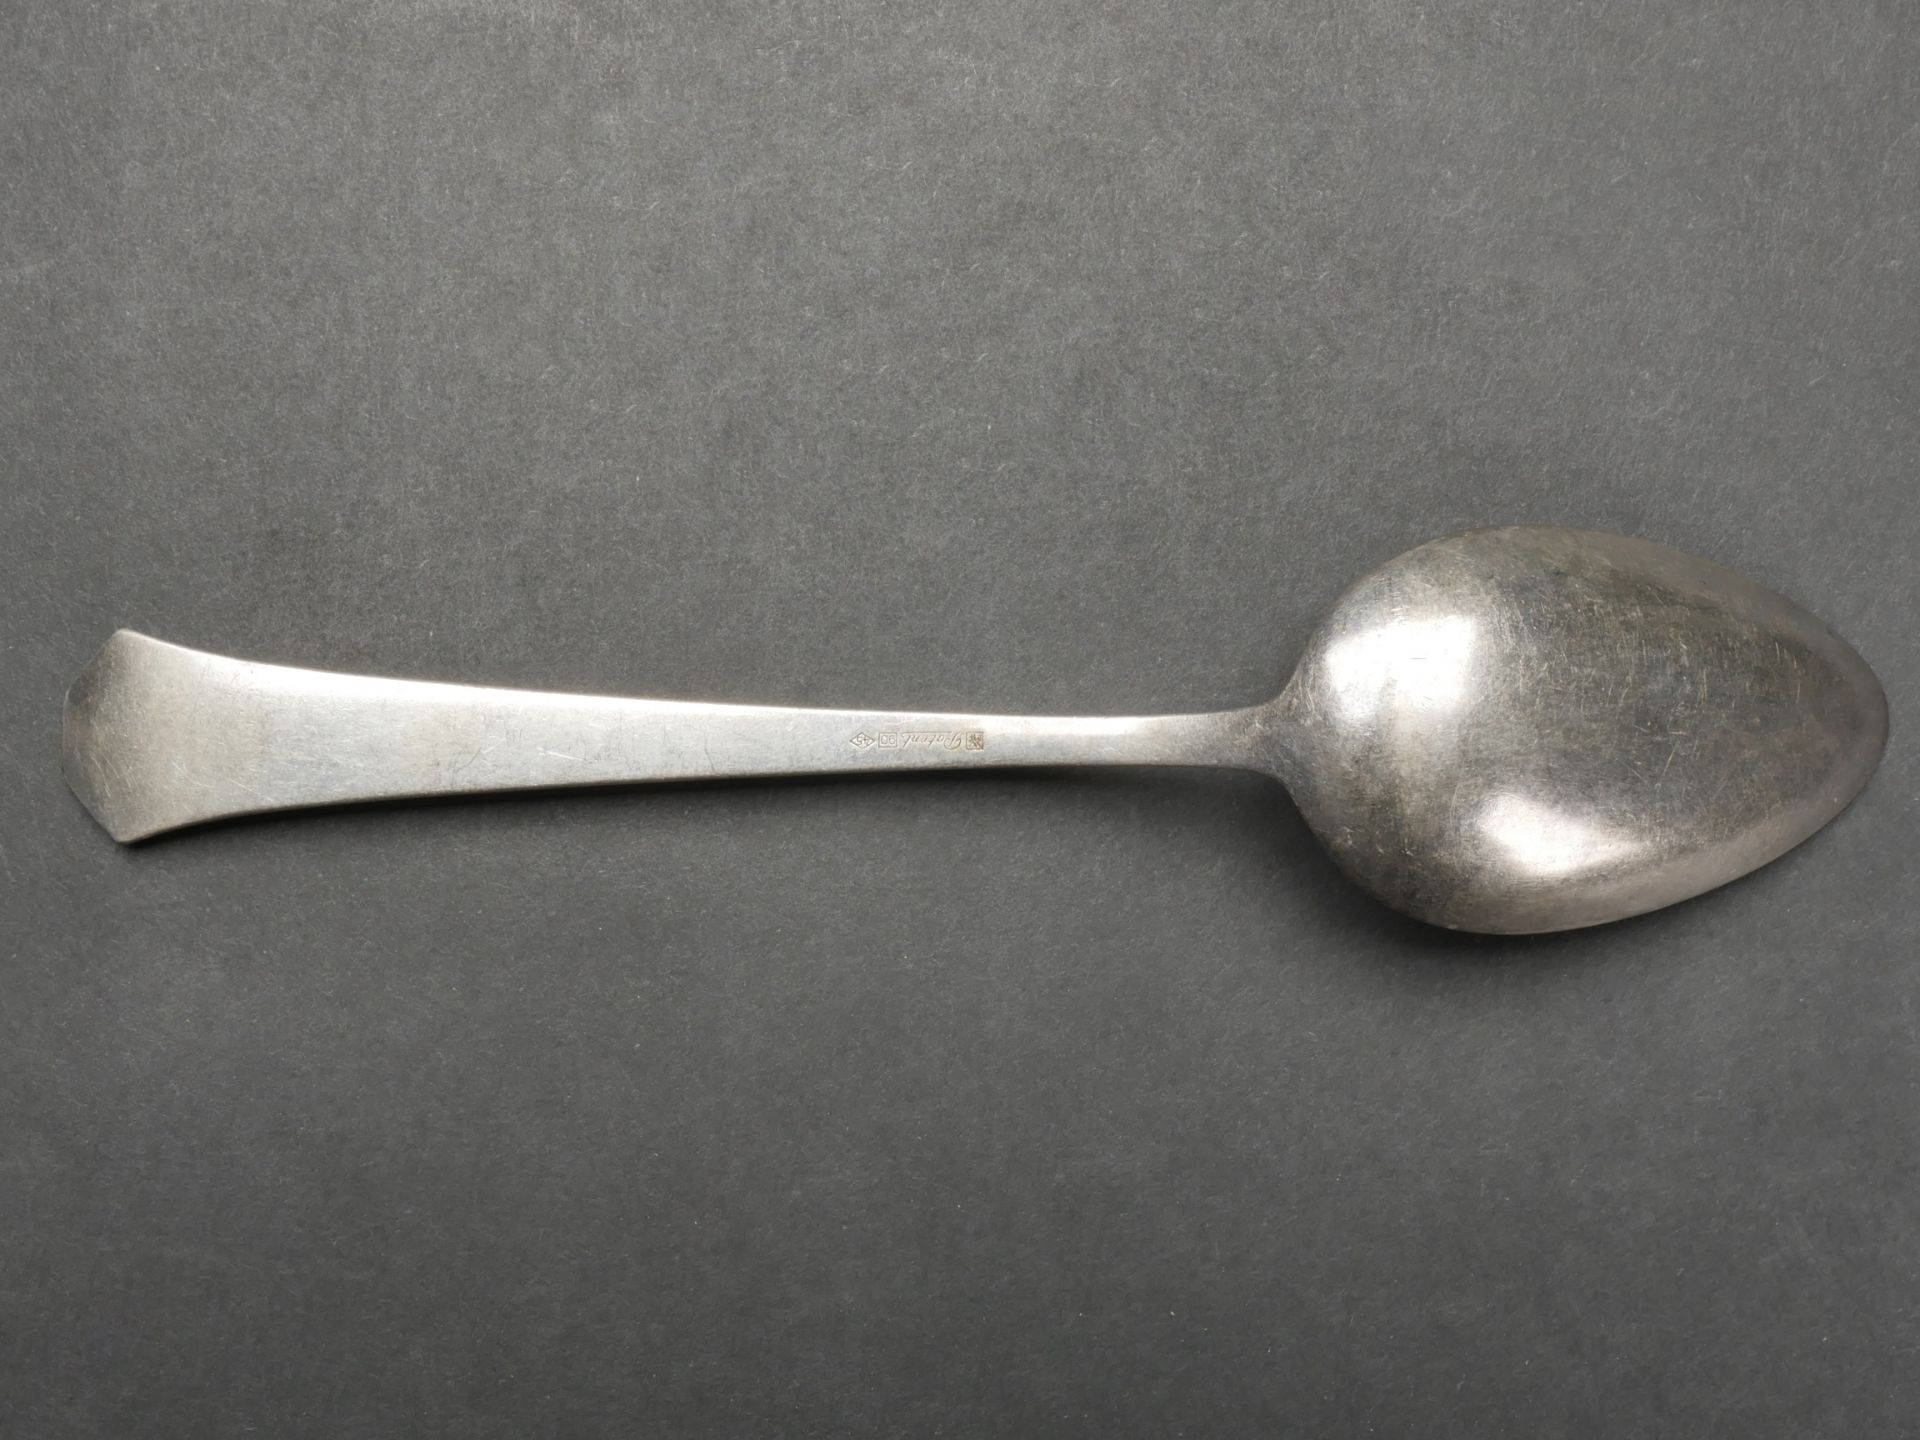 Cuillere SS Wewelsburg. SS Wewelsburg spoon. - Image 2 of 5